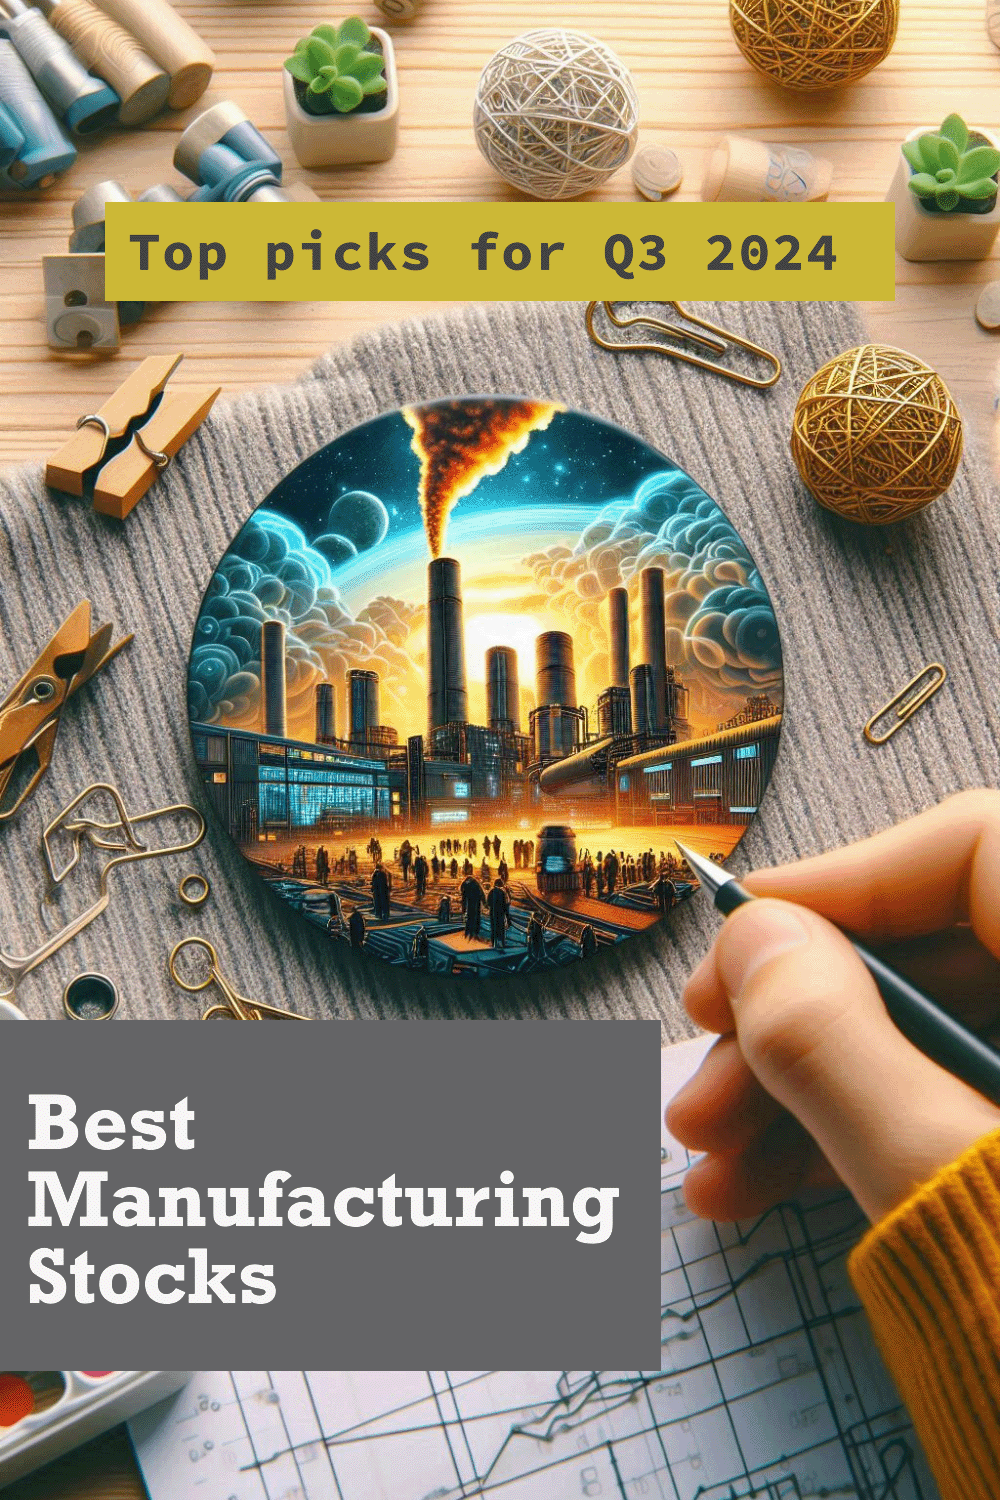 Best manufacturing stocks to invest in Q3 2024